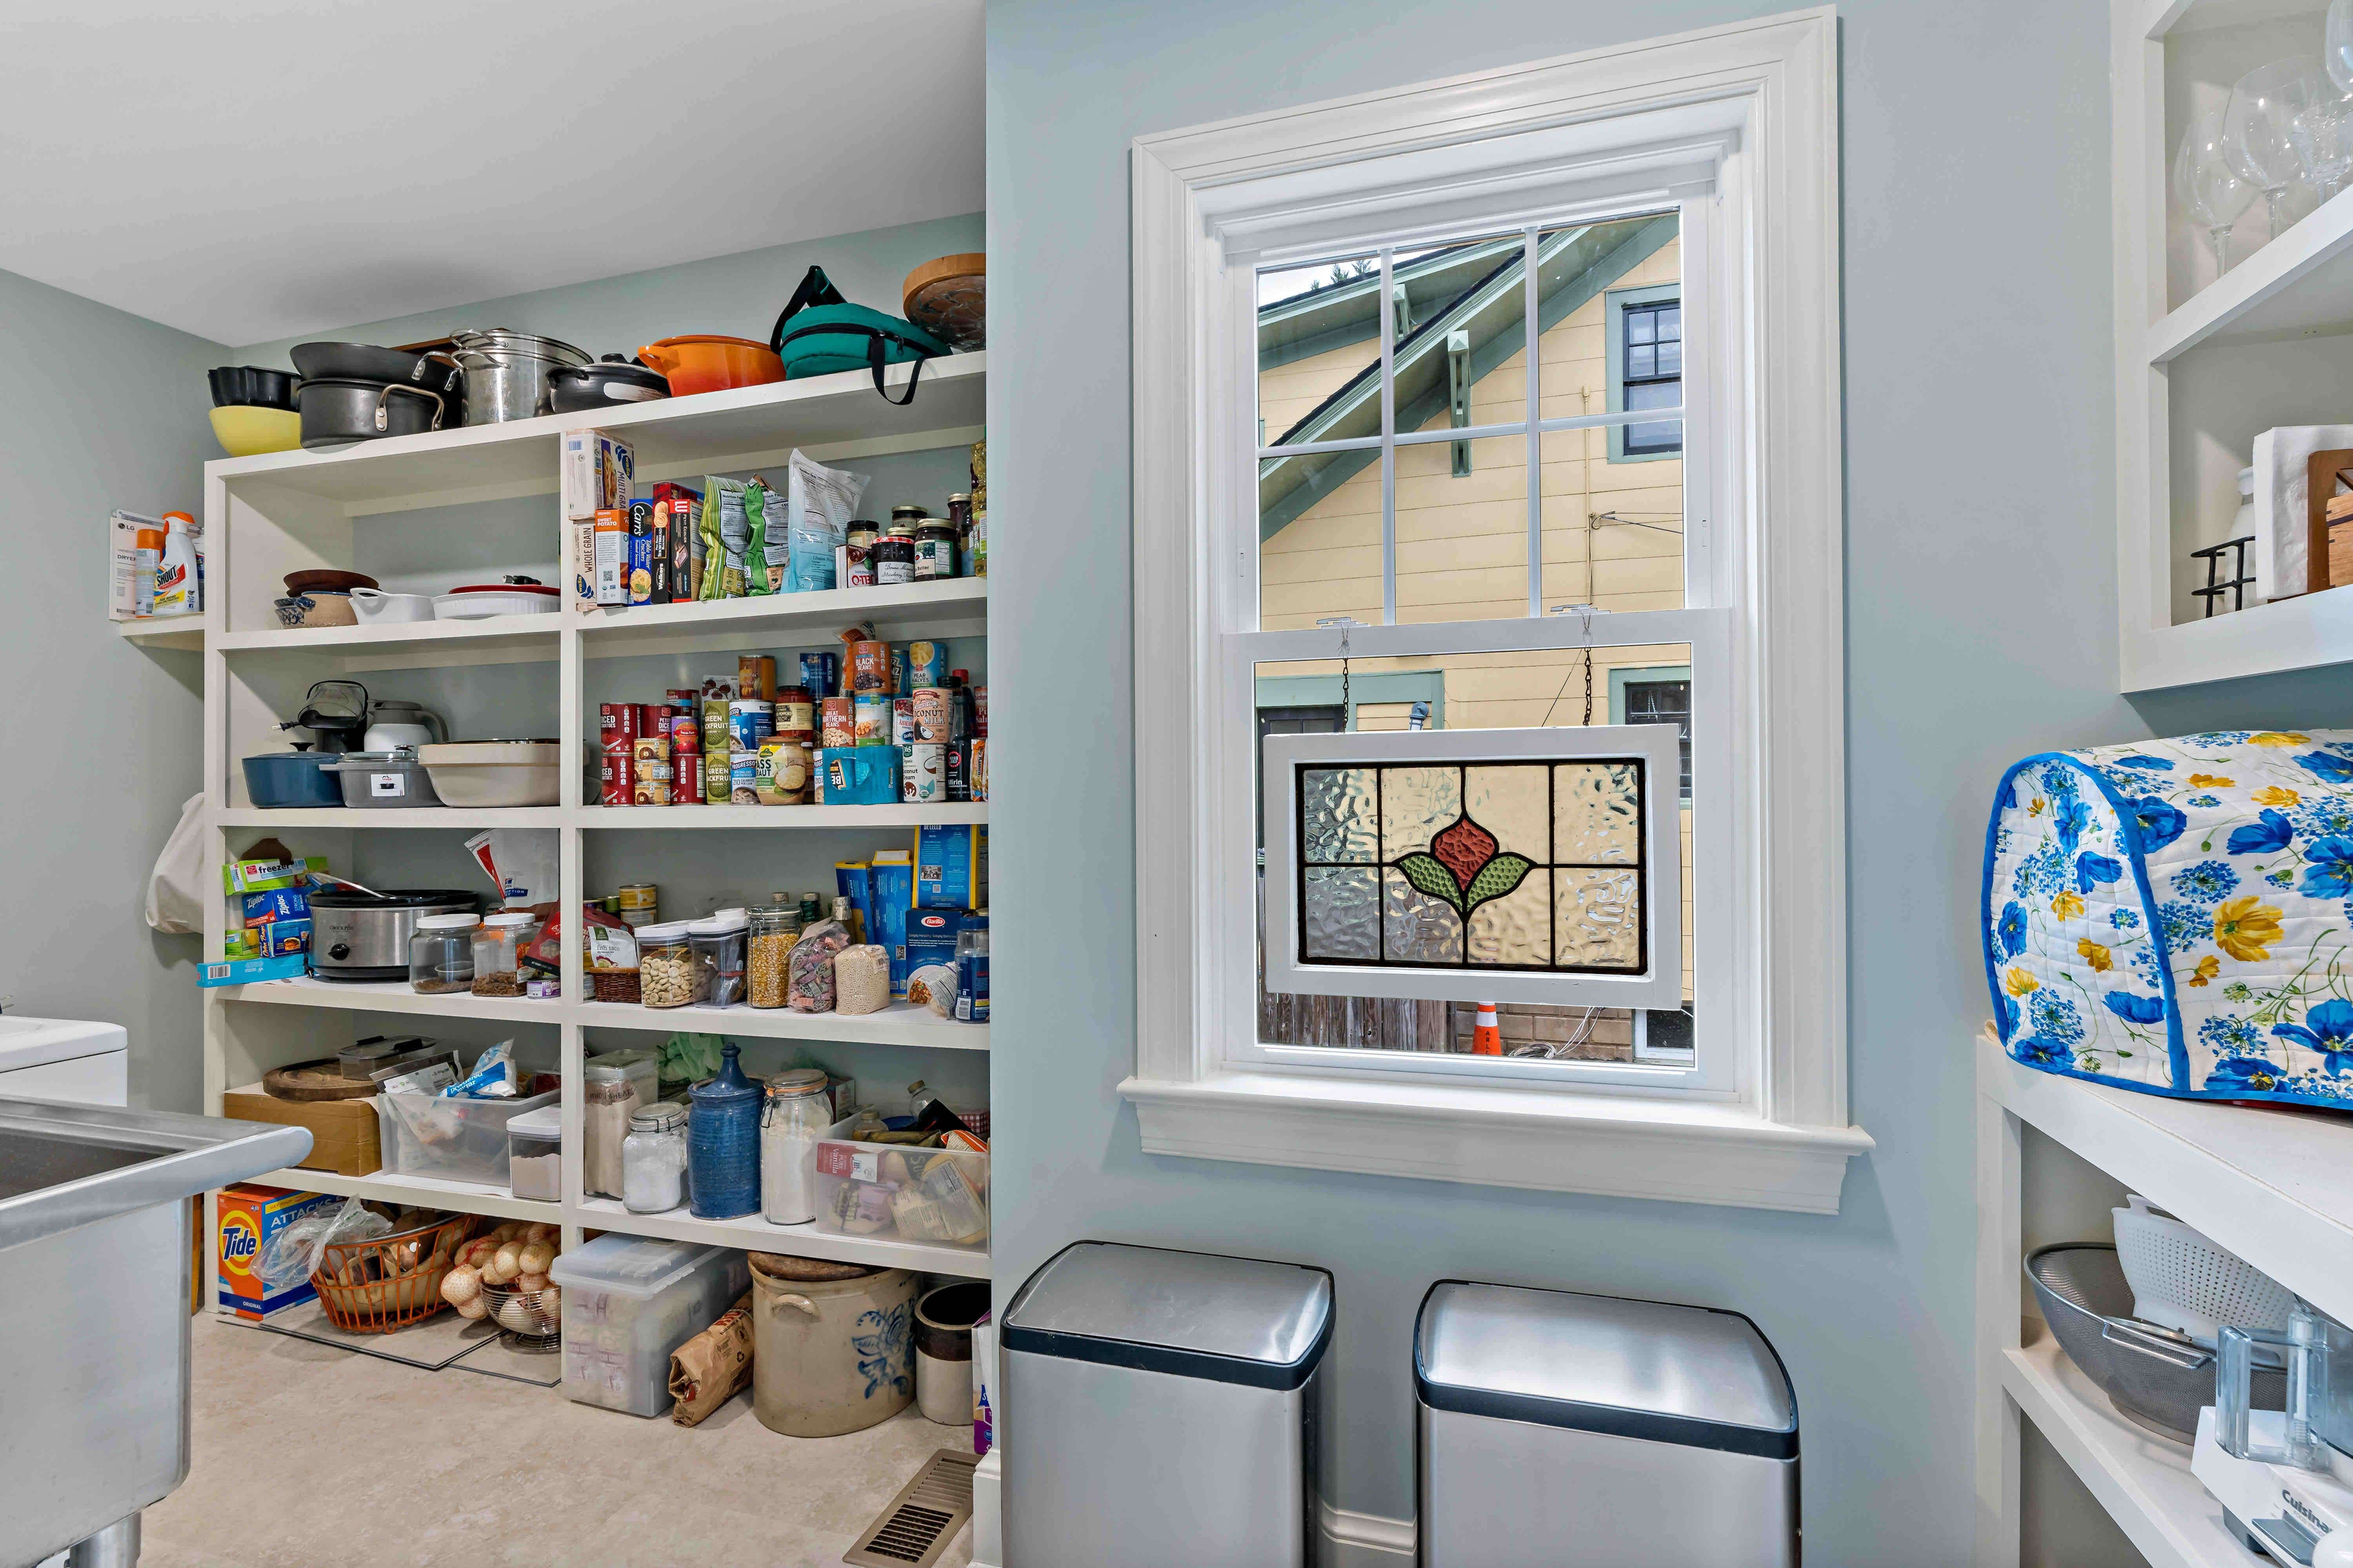 Kitchen pantry with built in shelves and window